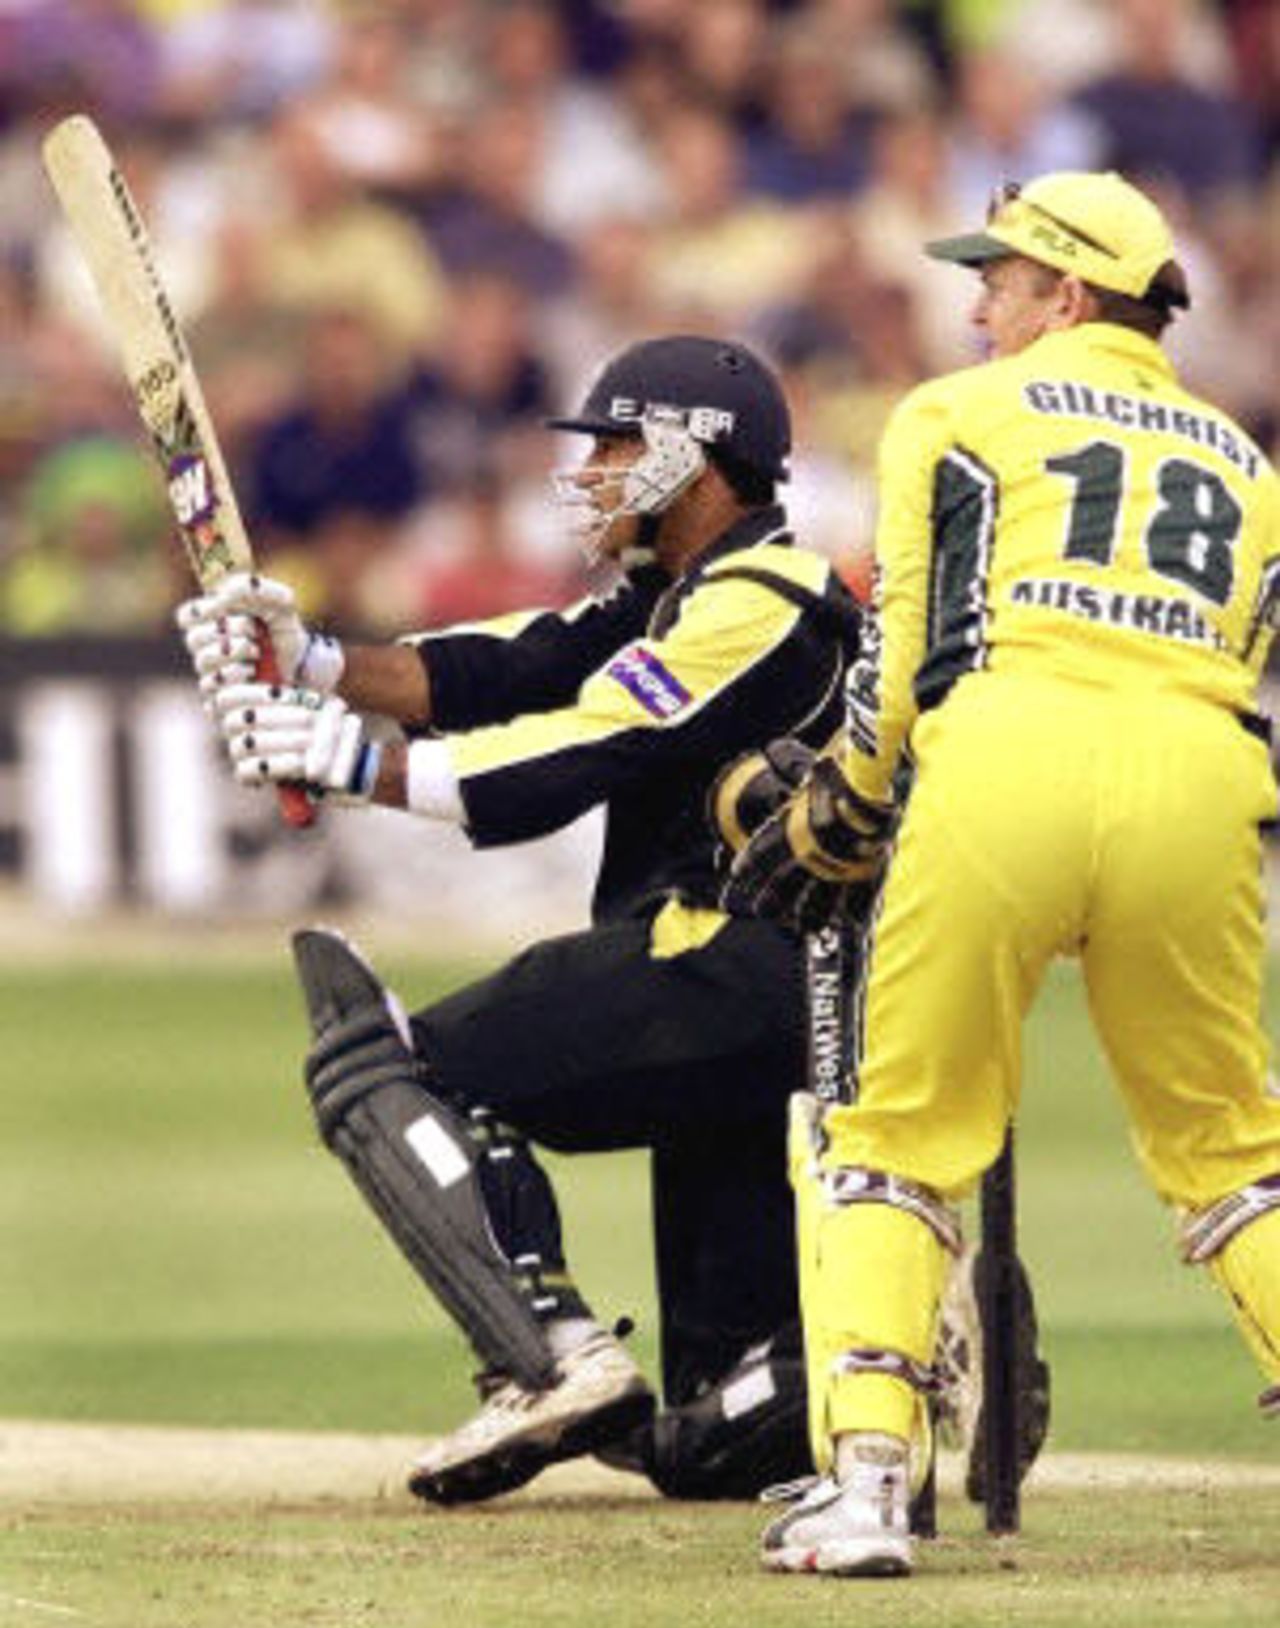 Salim Elahi sweeps the ball towards the boundary on the way to scoring his fifty, 8th ODI at Trent Bridge, 19 June 2001.